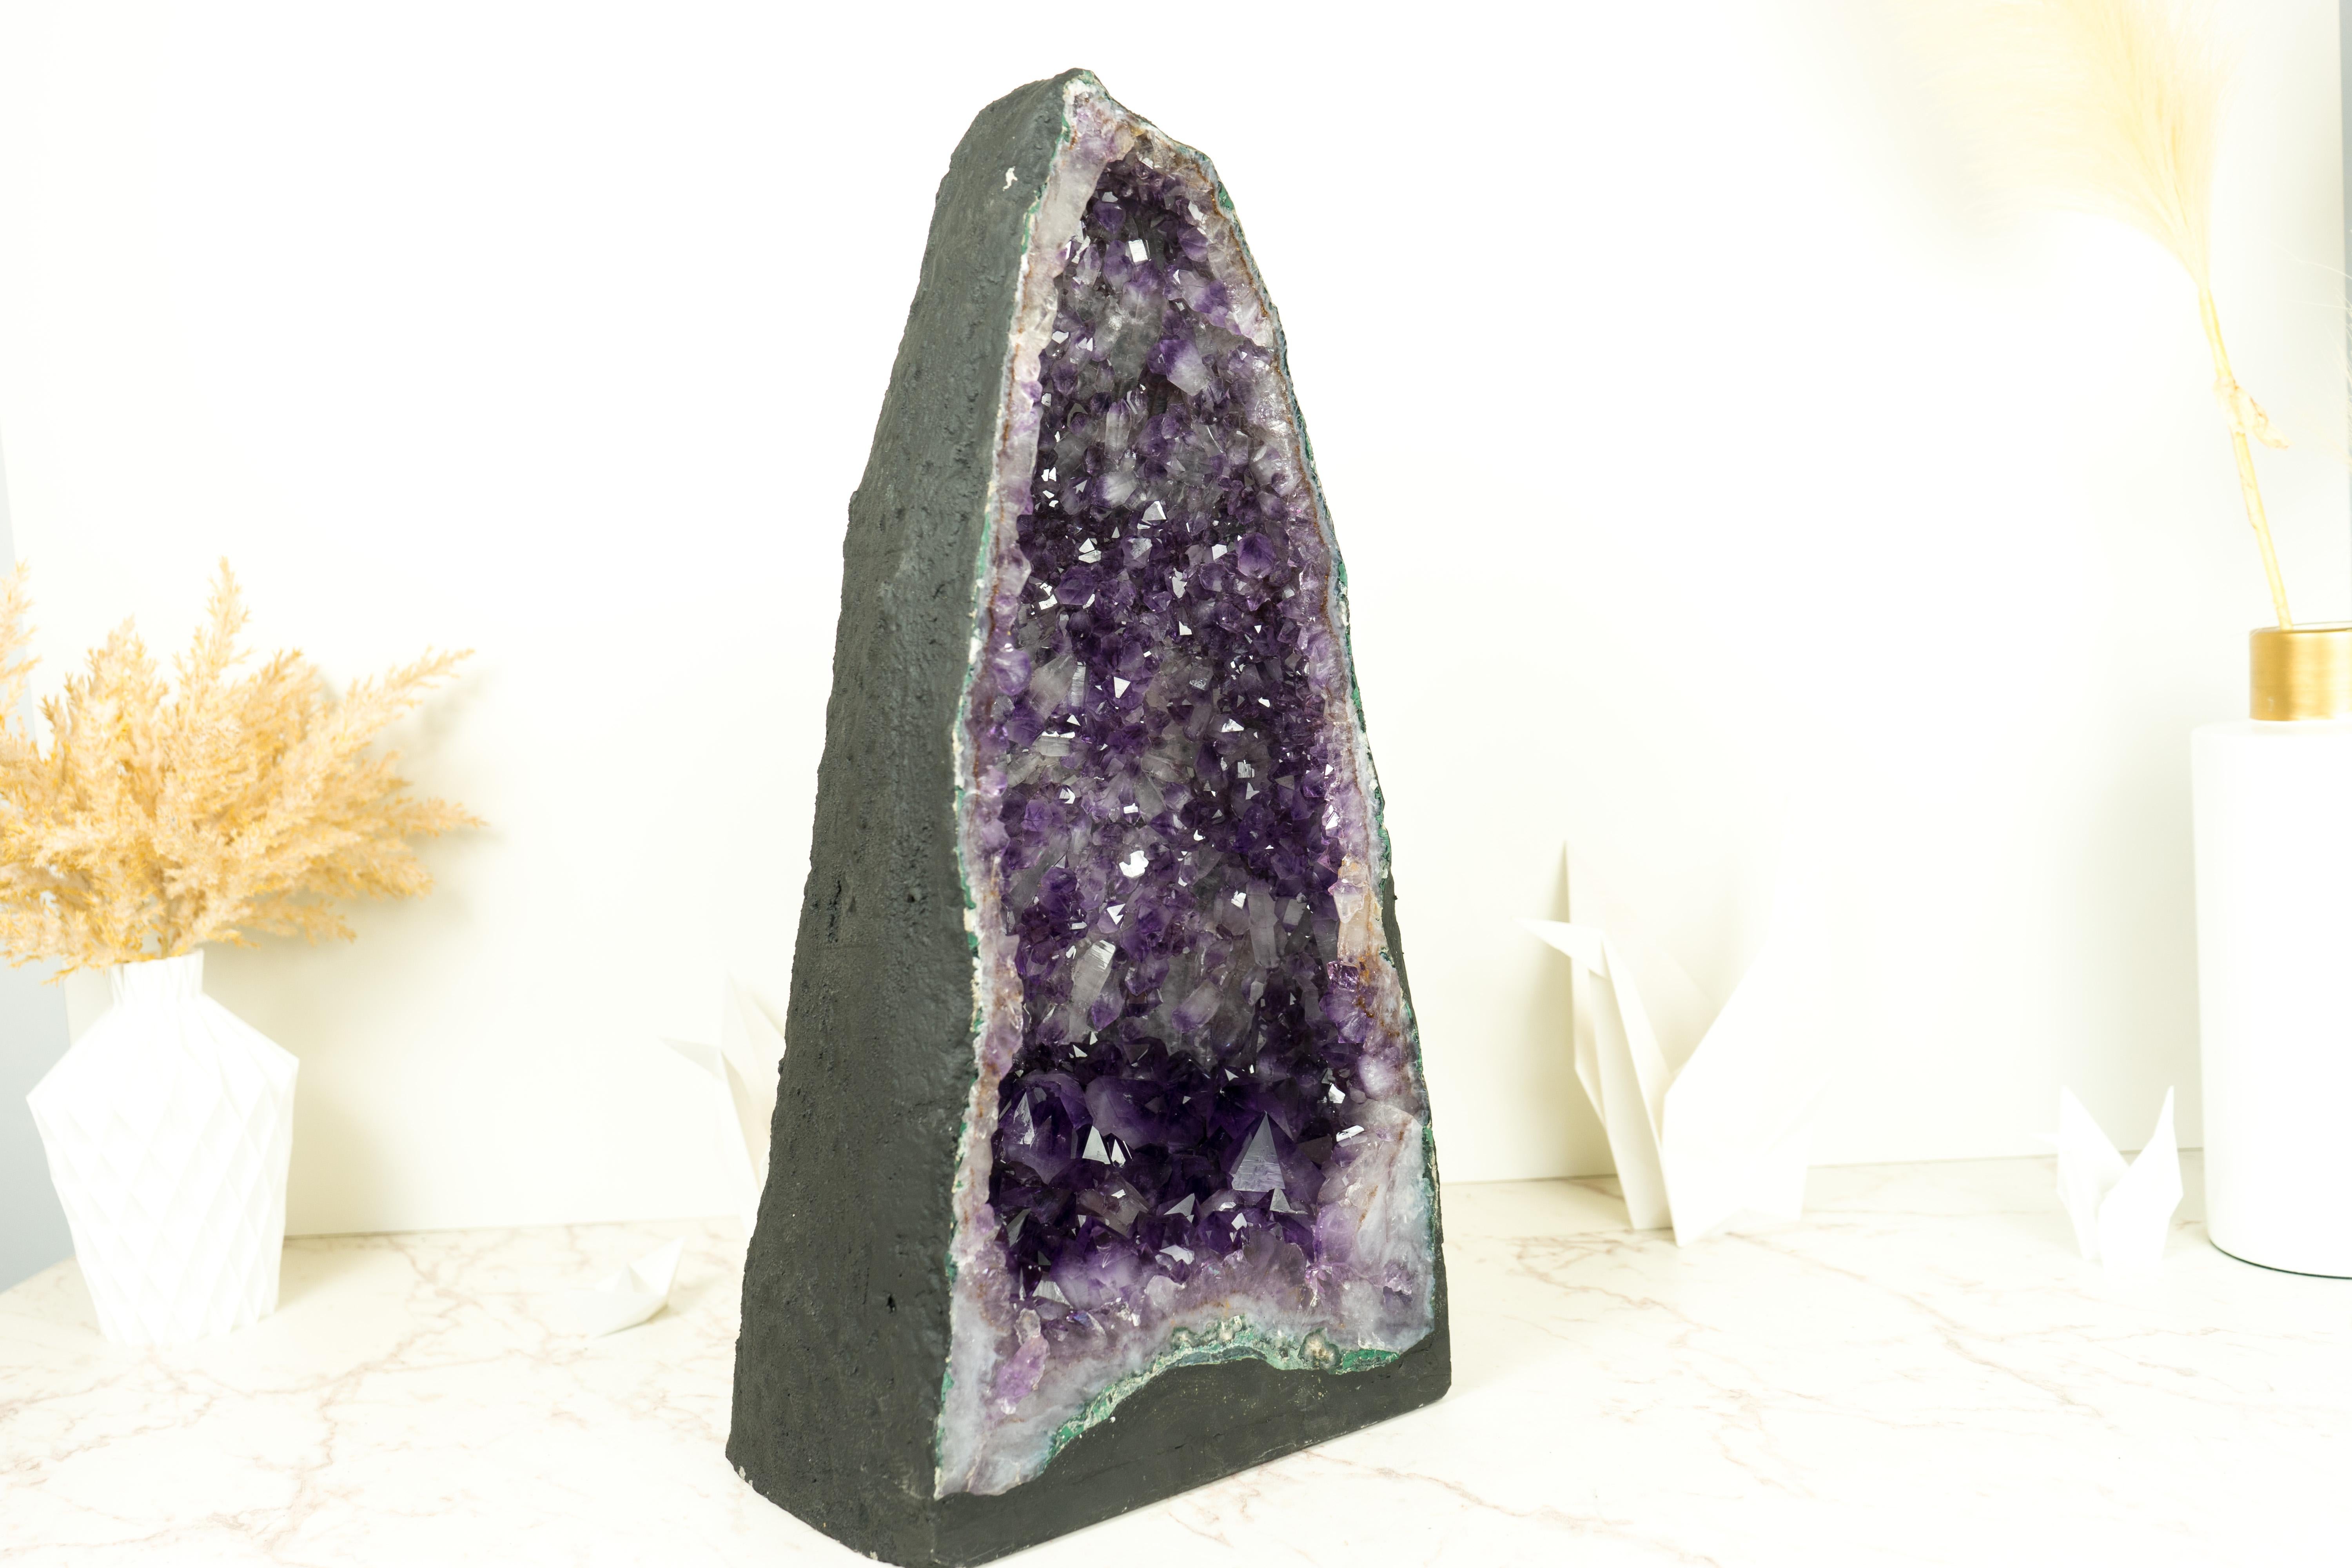 With its many qualities, including the rare Amethyst Druzy and its beautiful formation, this magnificent Amethyst Geode Cathedral is sure to add a pop of violet-purple color and a calming, peaceful atmosphere to your decor or crystal